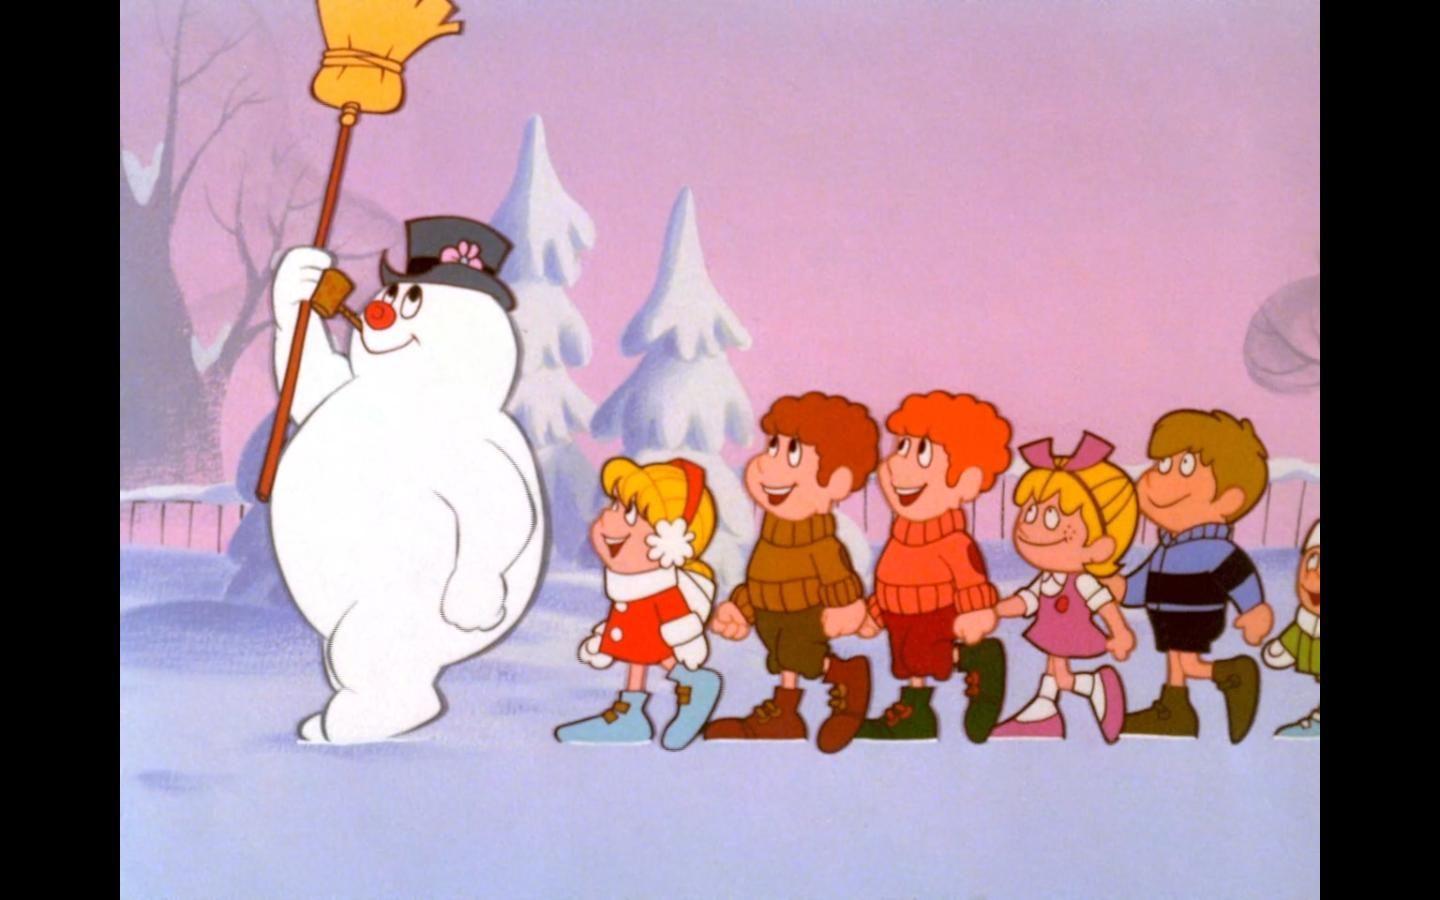 Pic of the Day: ♫ “Frosty the Snowman / Was a jolly happy soul